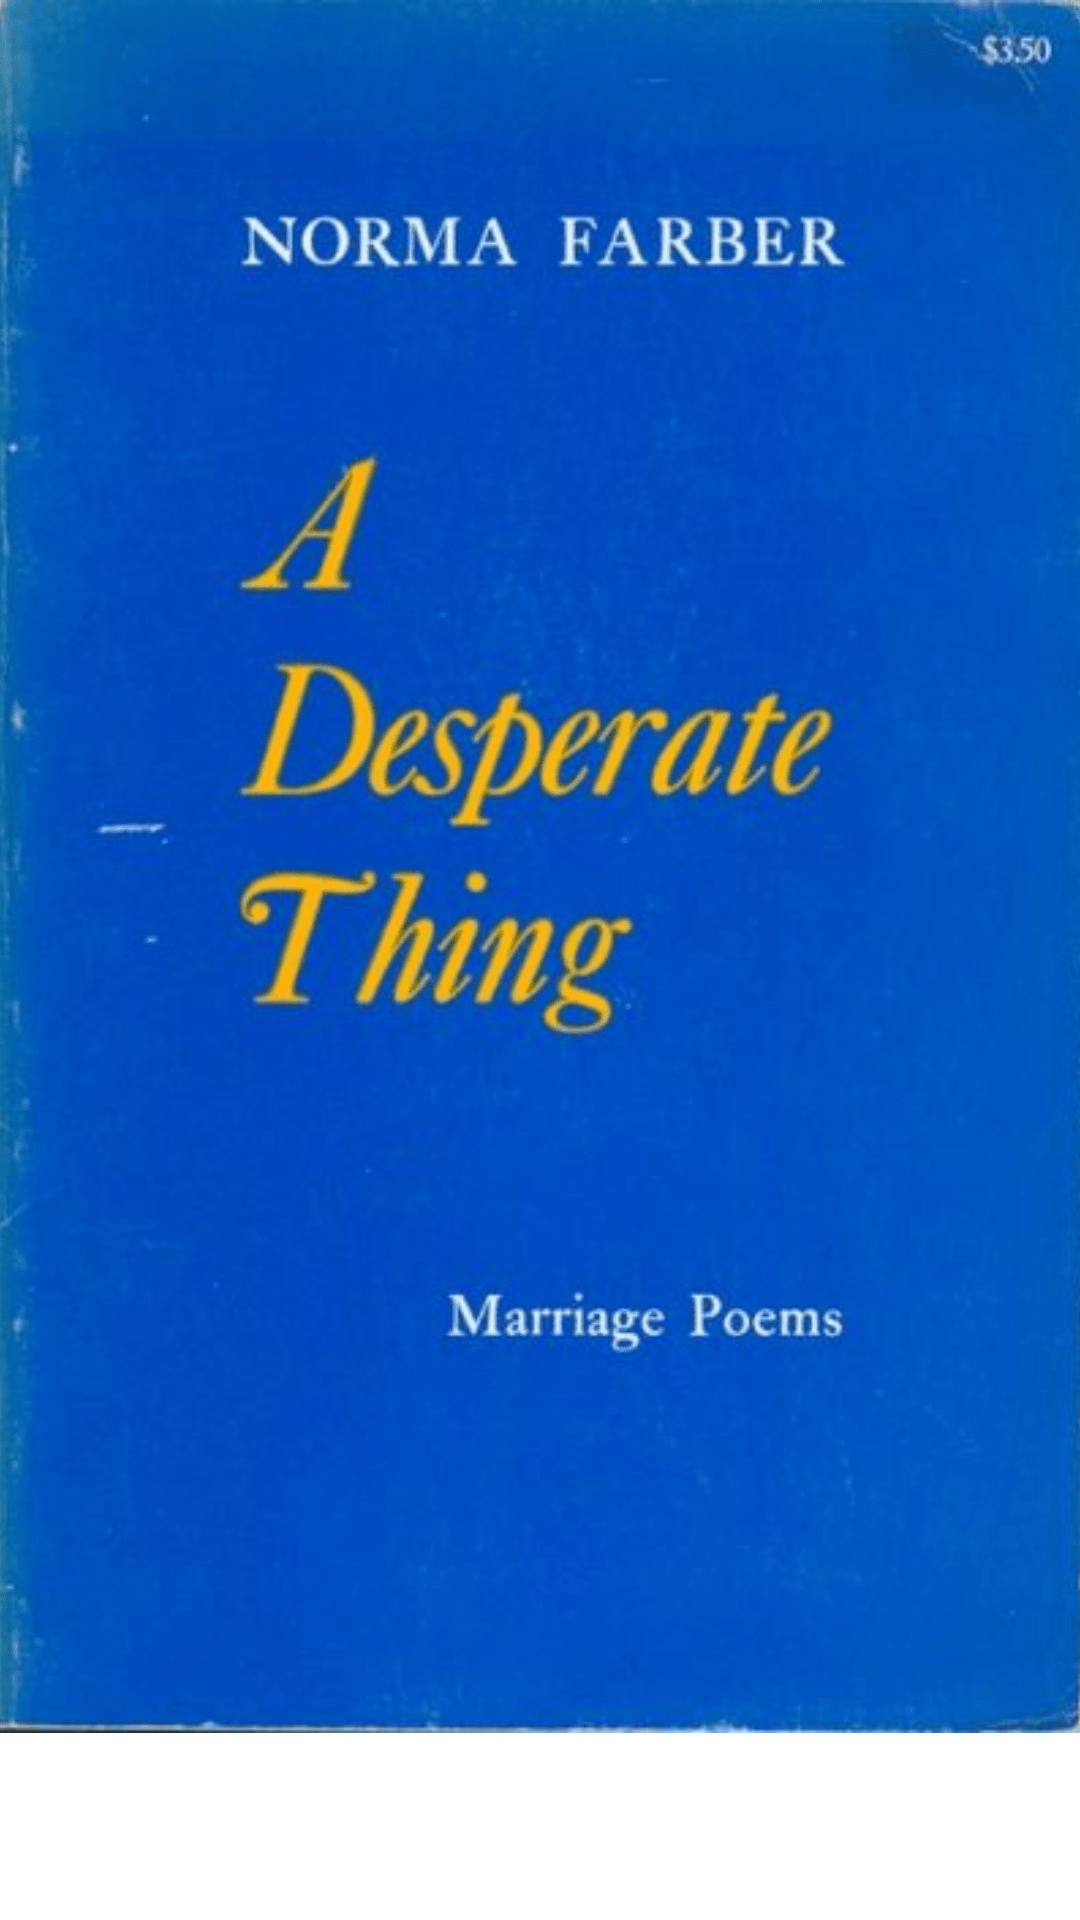 A desperate thing by Norma Farber